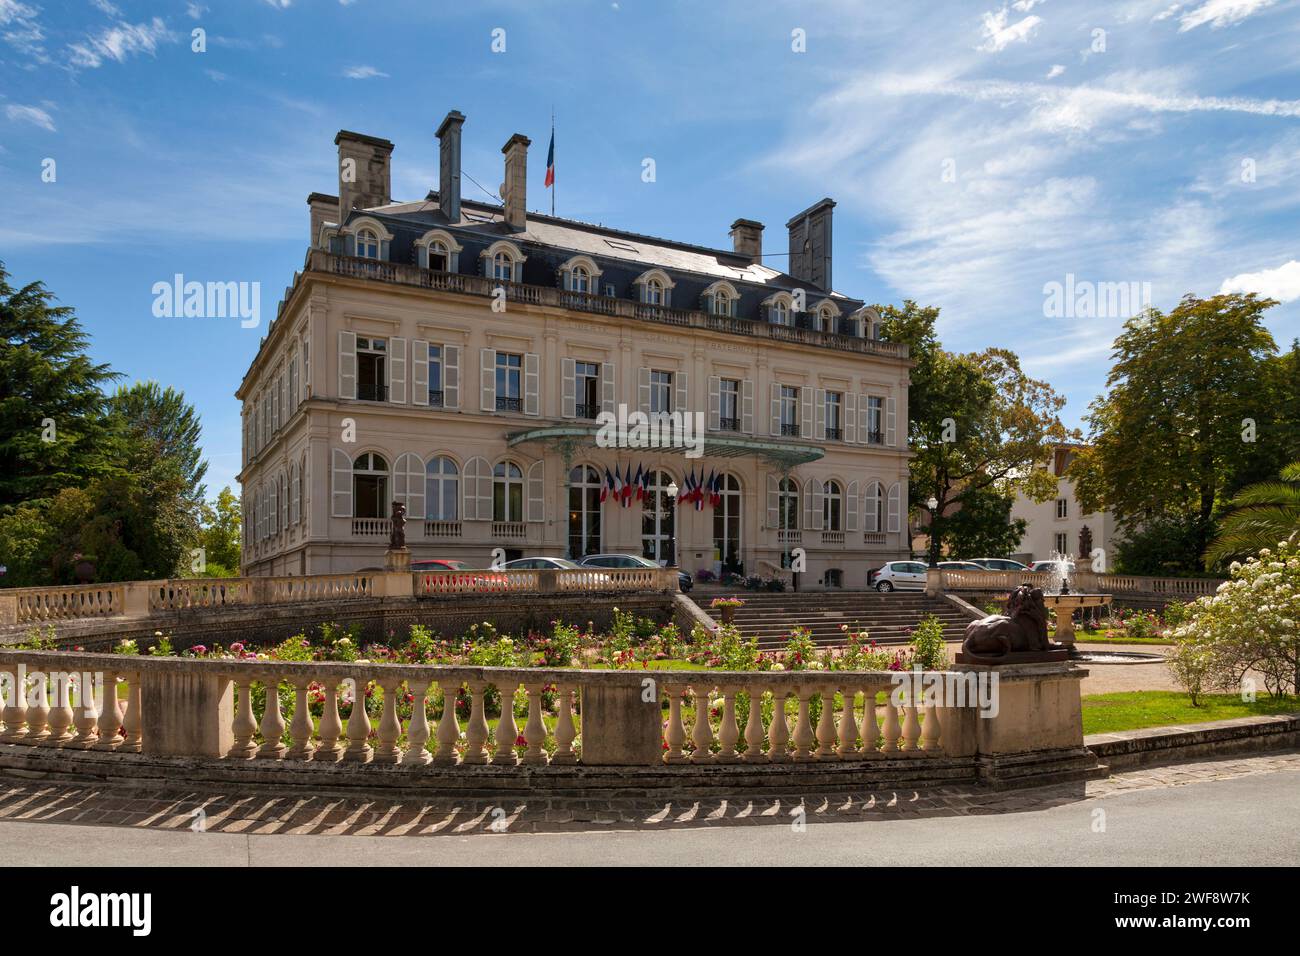 Epernay, France - July 23 2020: The town hall of Épernay, built around 1858 by the architect of the Montparnasse station, Victor Lenoir for the Auban- Stock Photo